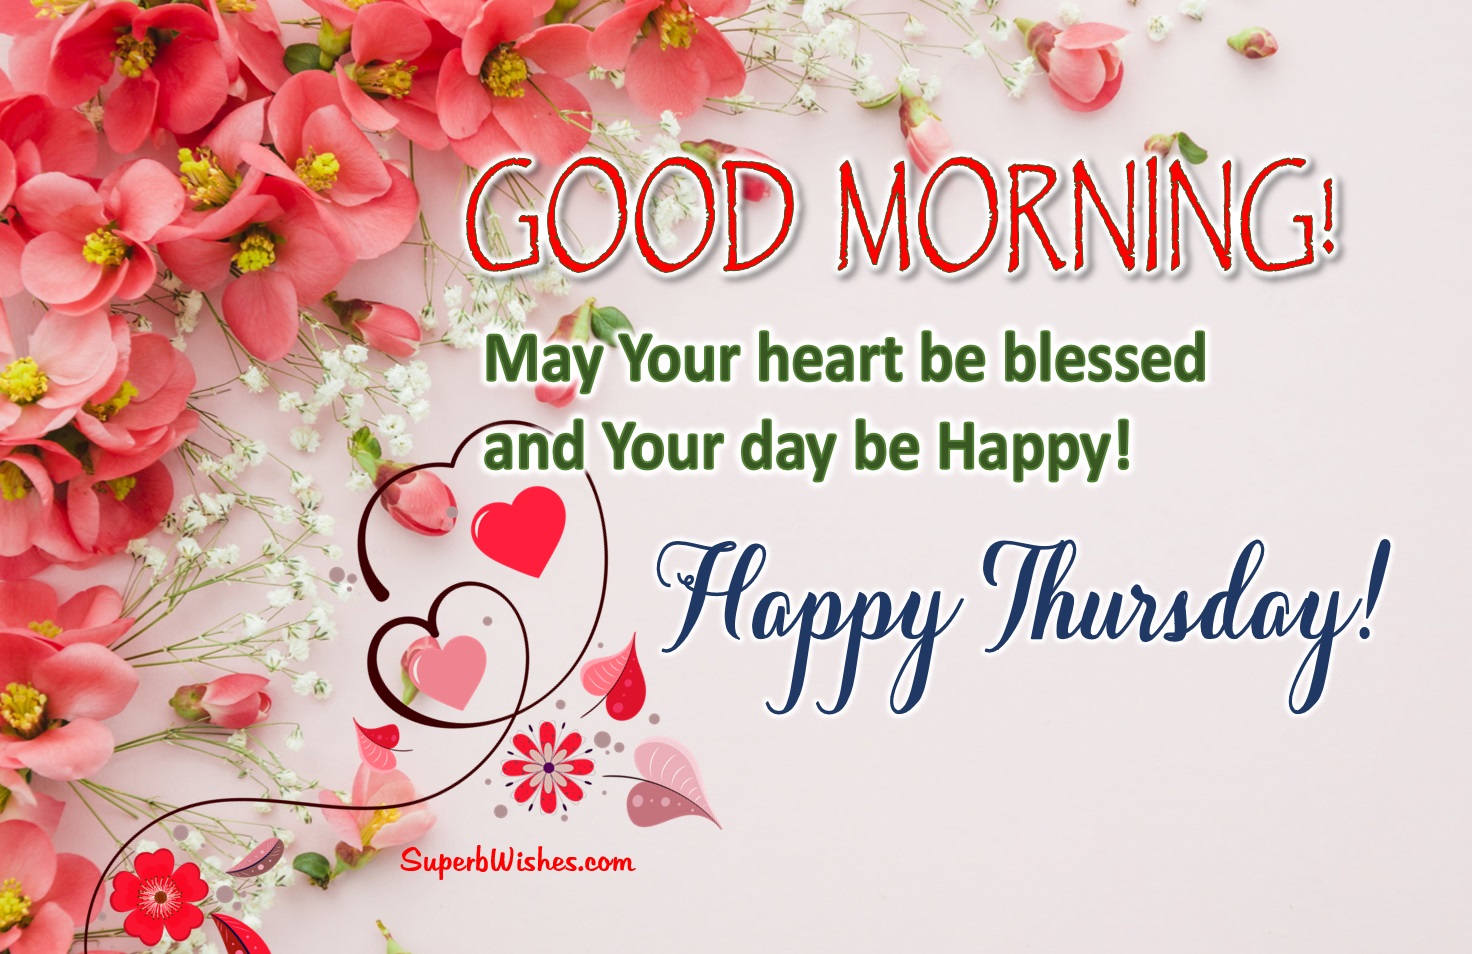 Happy Thursday Images - May Your Heart Be Blessed | SuperbWishes